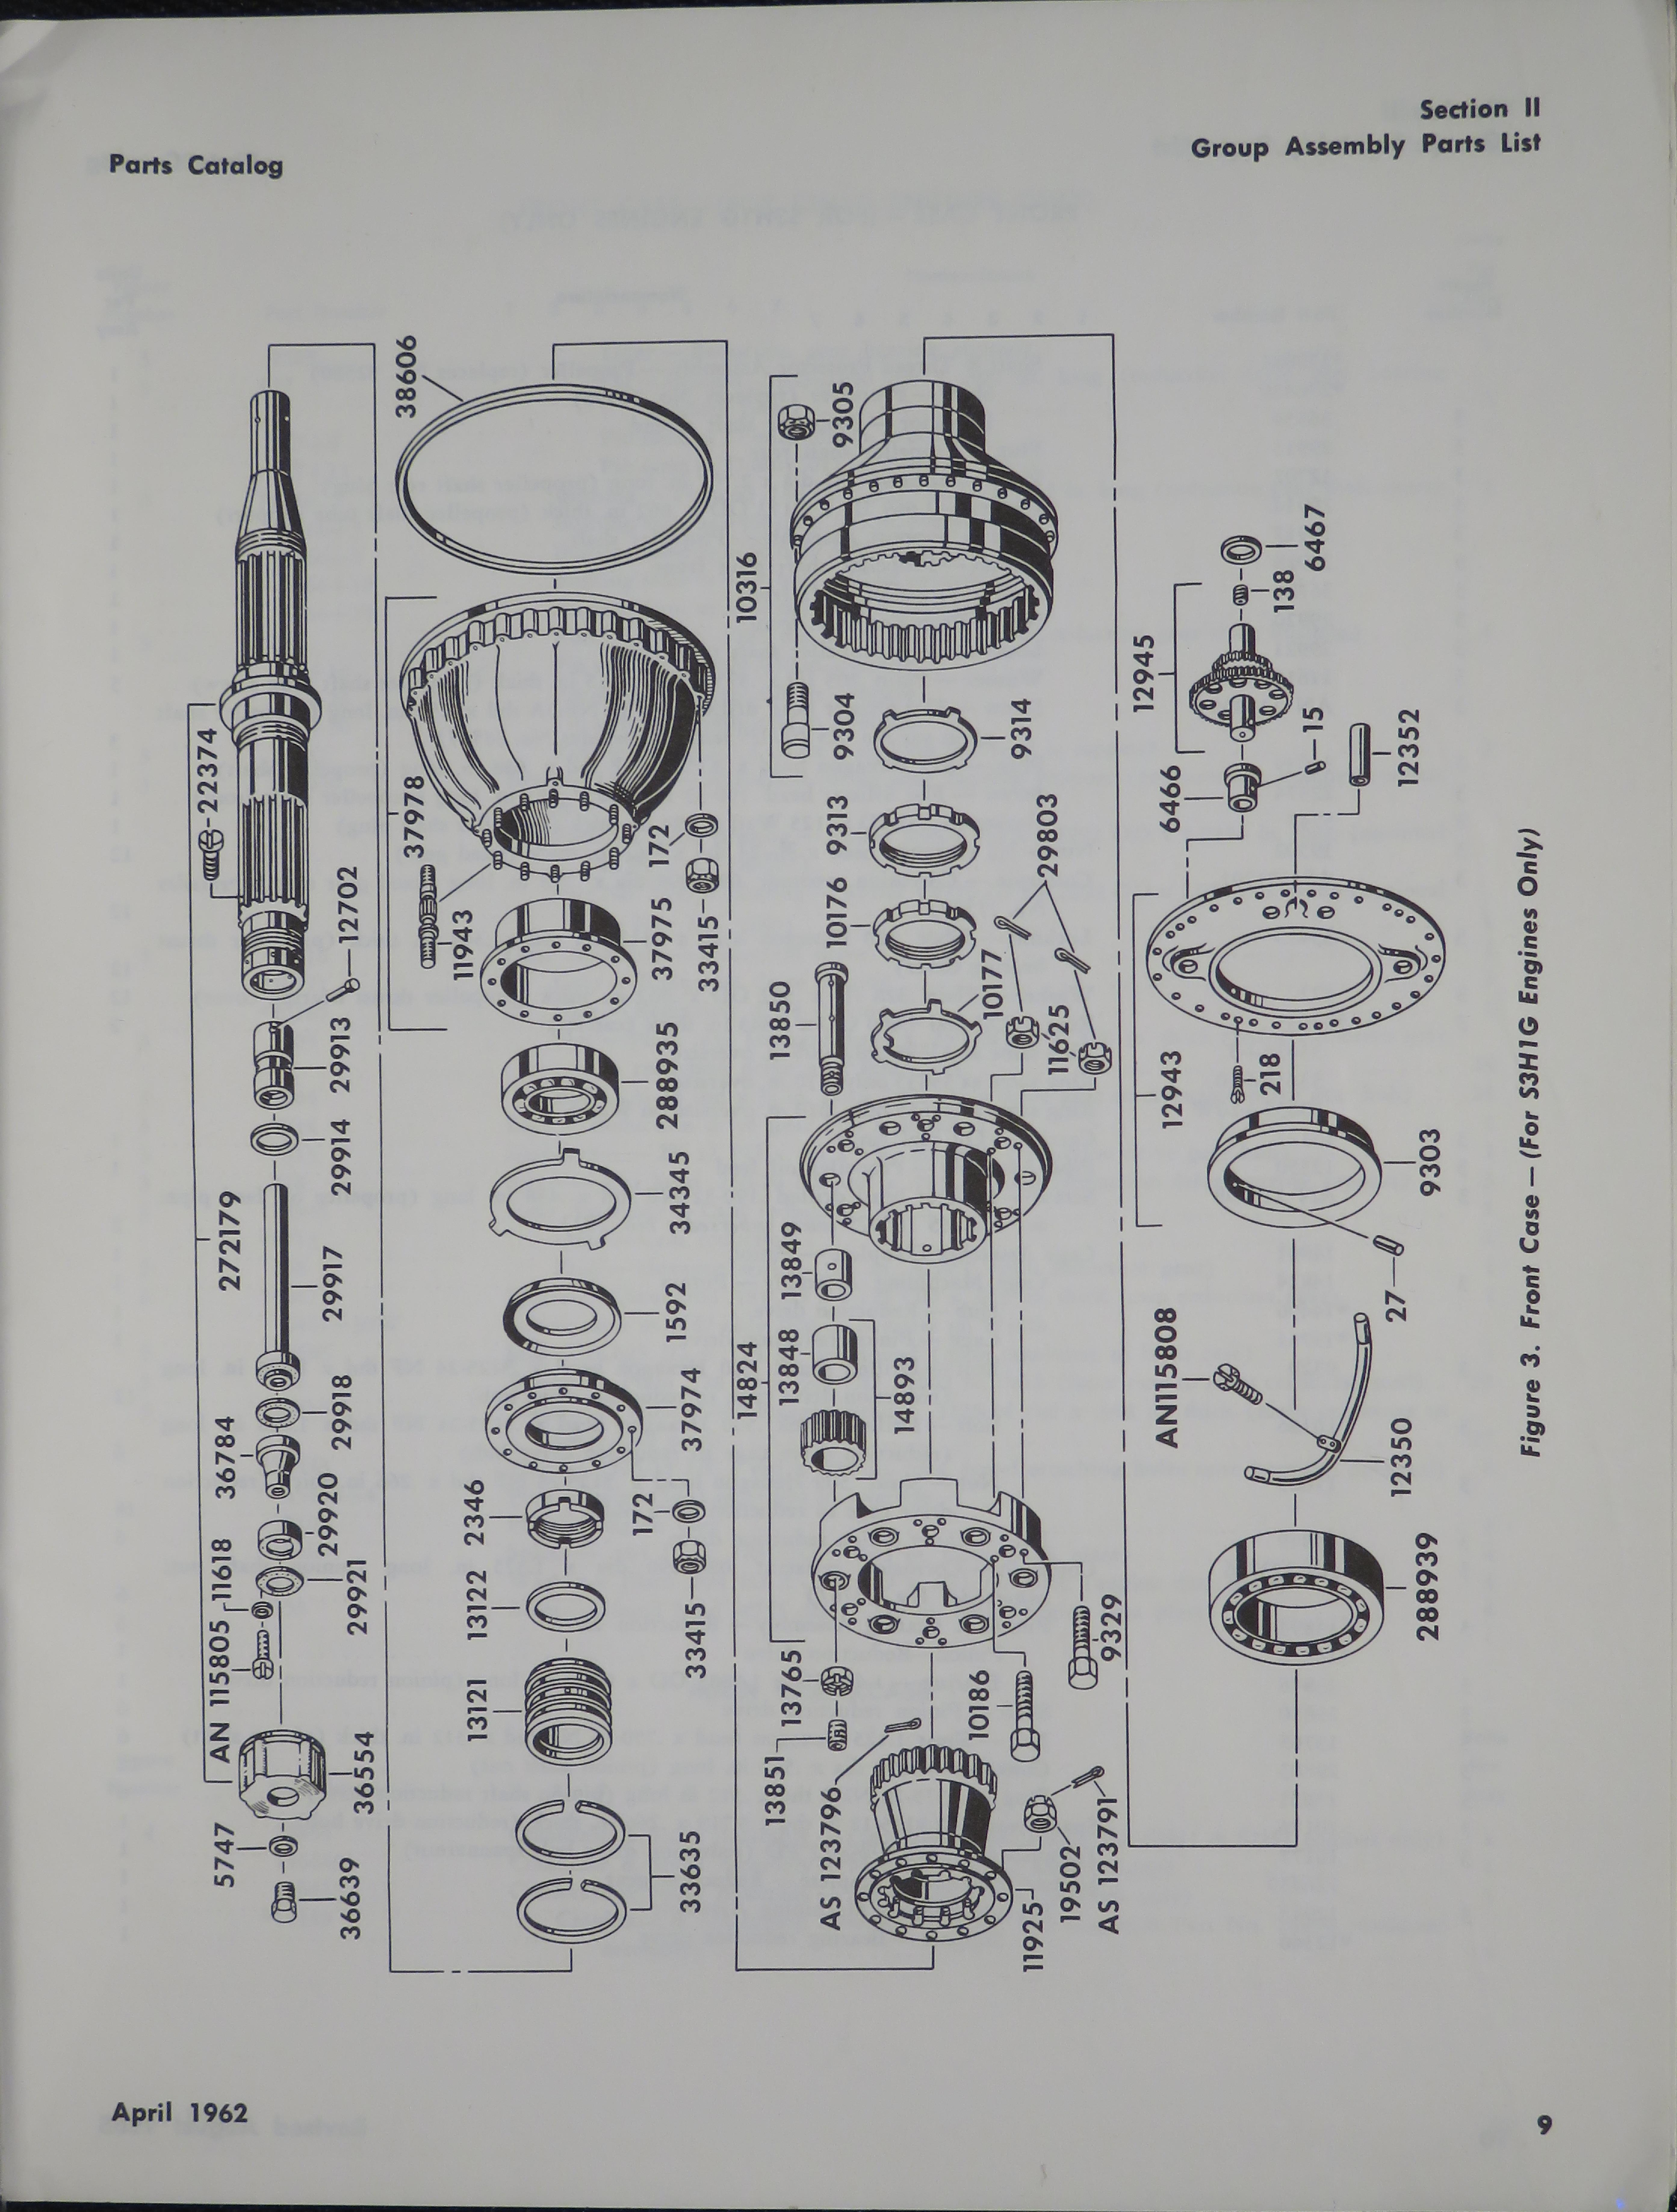 Sample page 15 from AirCorps Library document: Illustrated Parts Catalog for R-1340 Wasp Series Engines